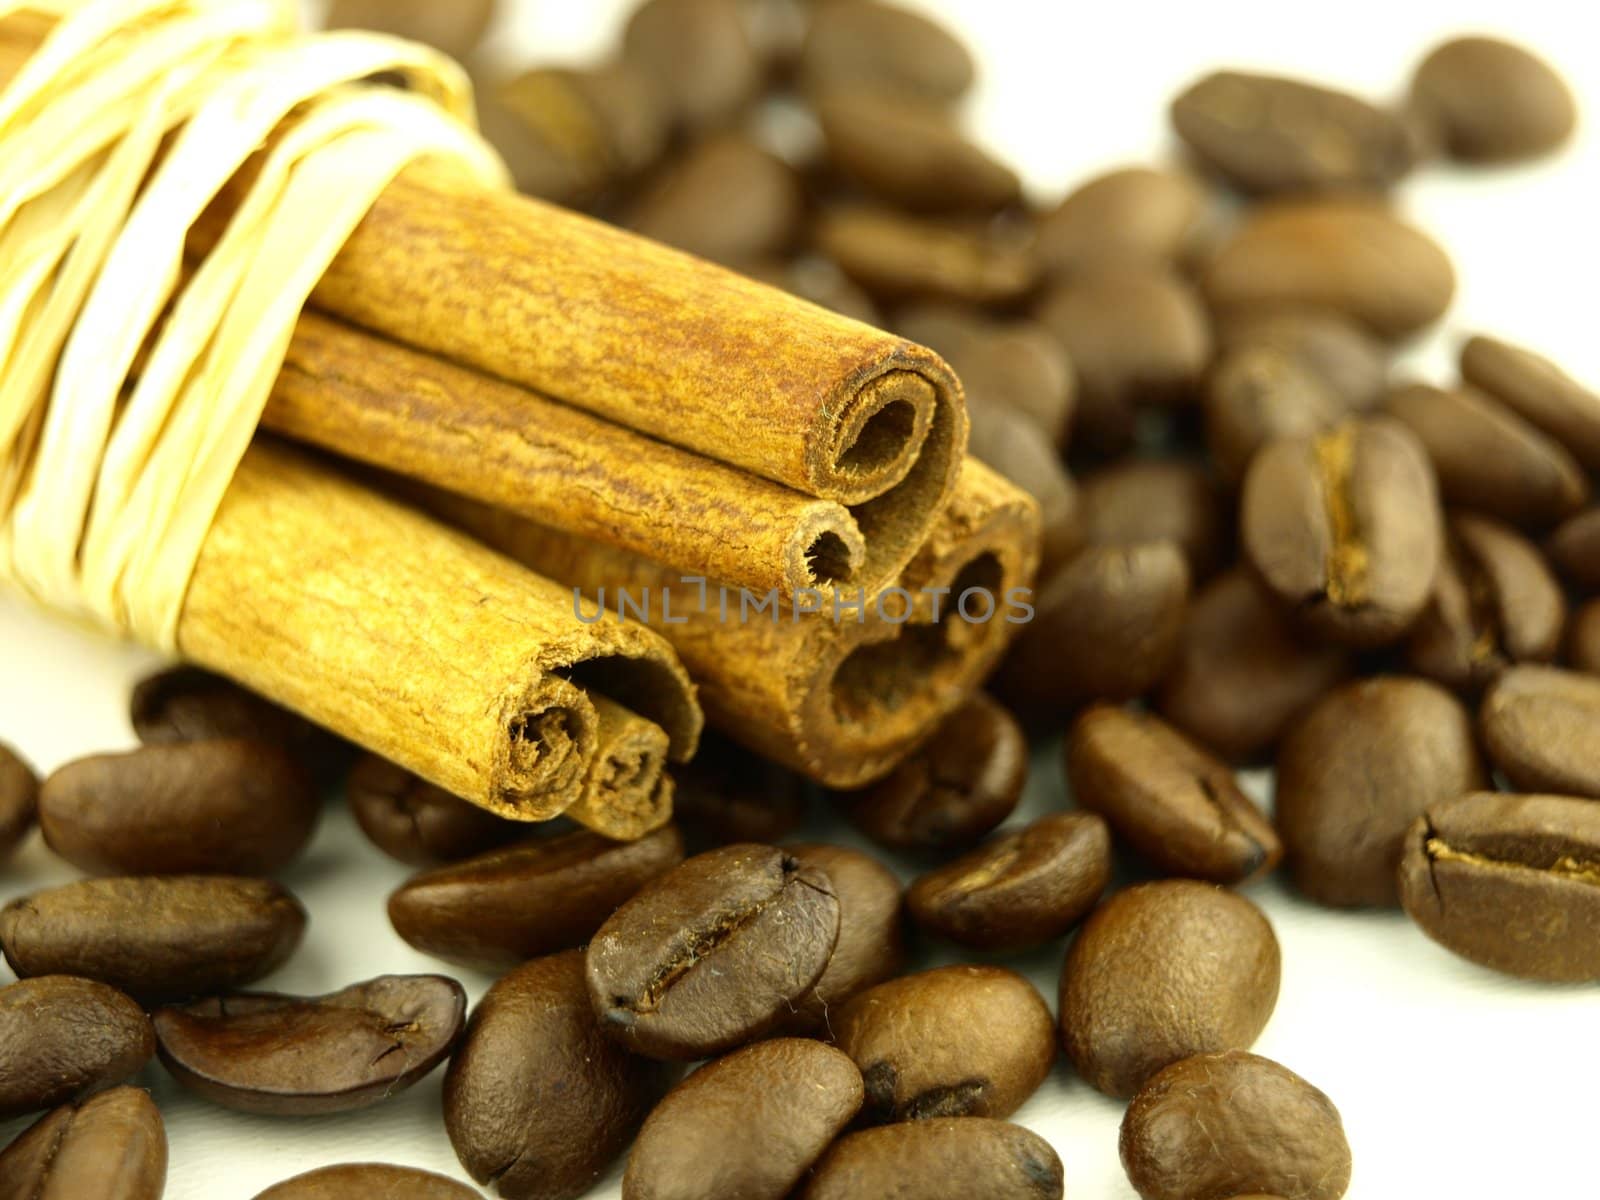 cinnamon and coffee beans by luckyhumek